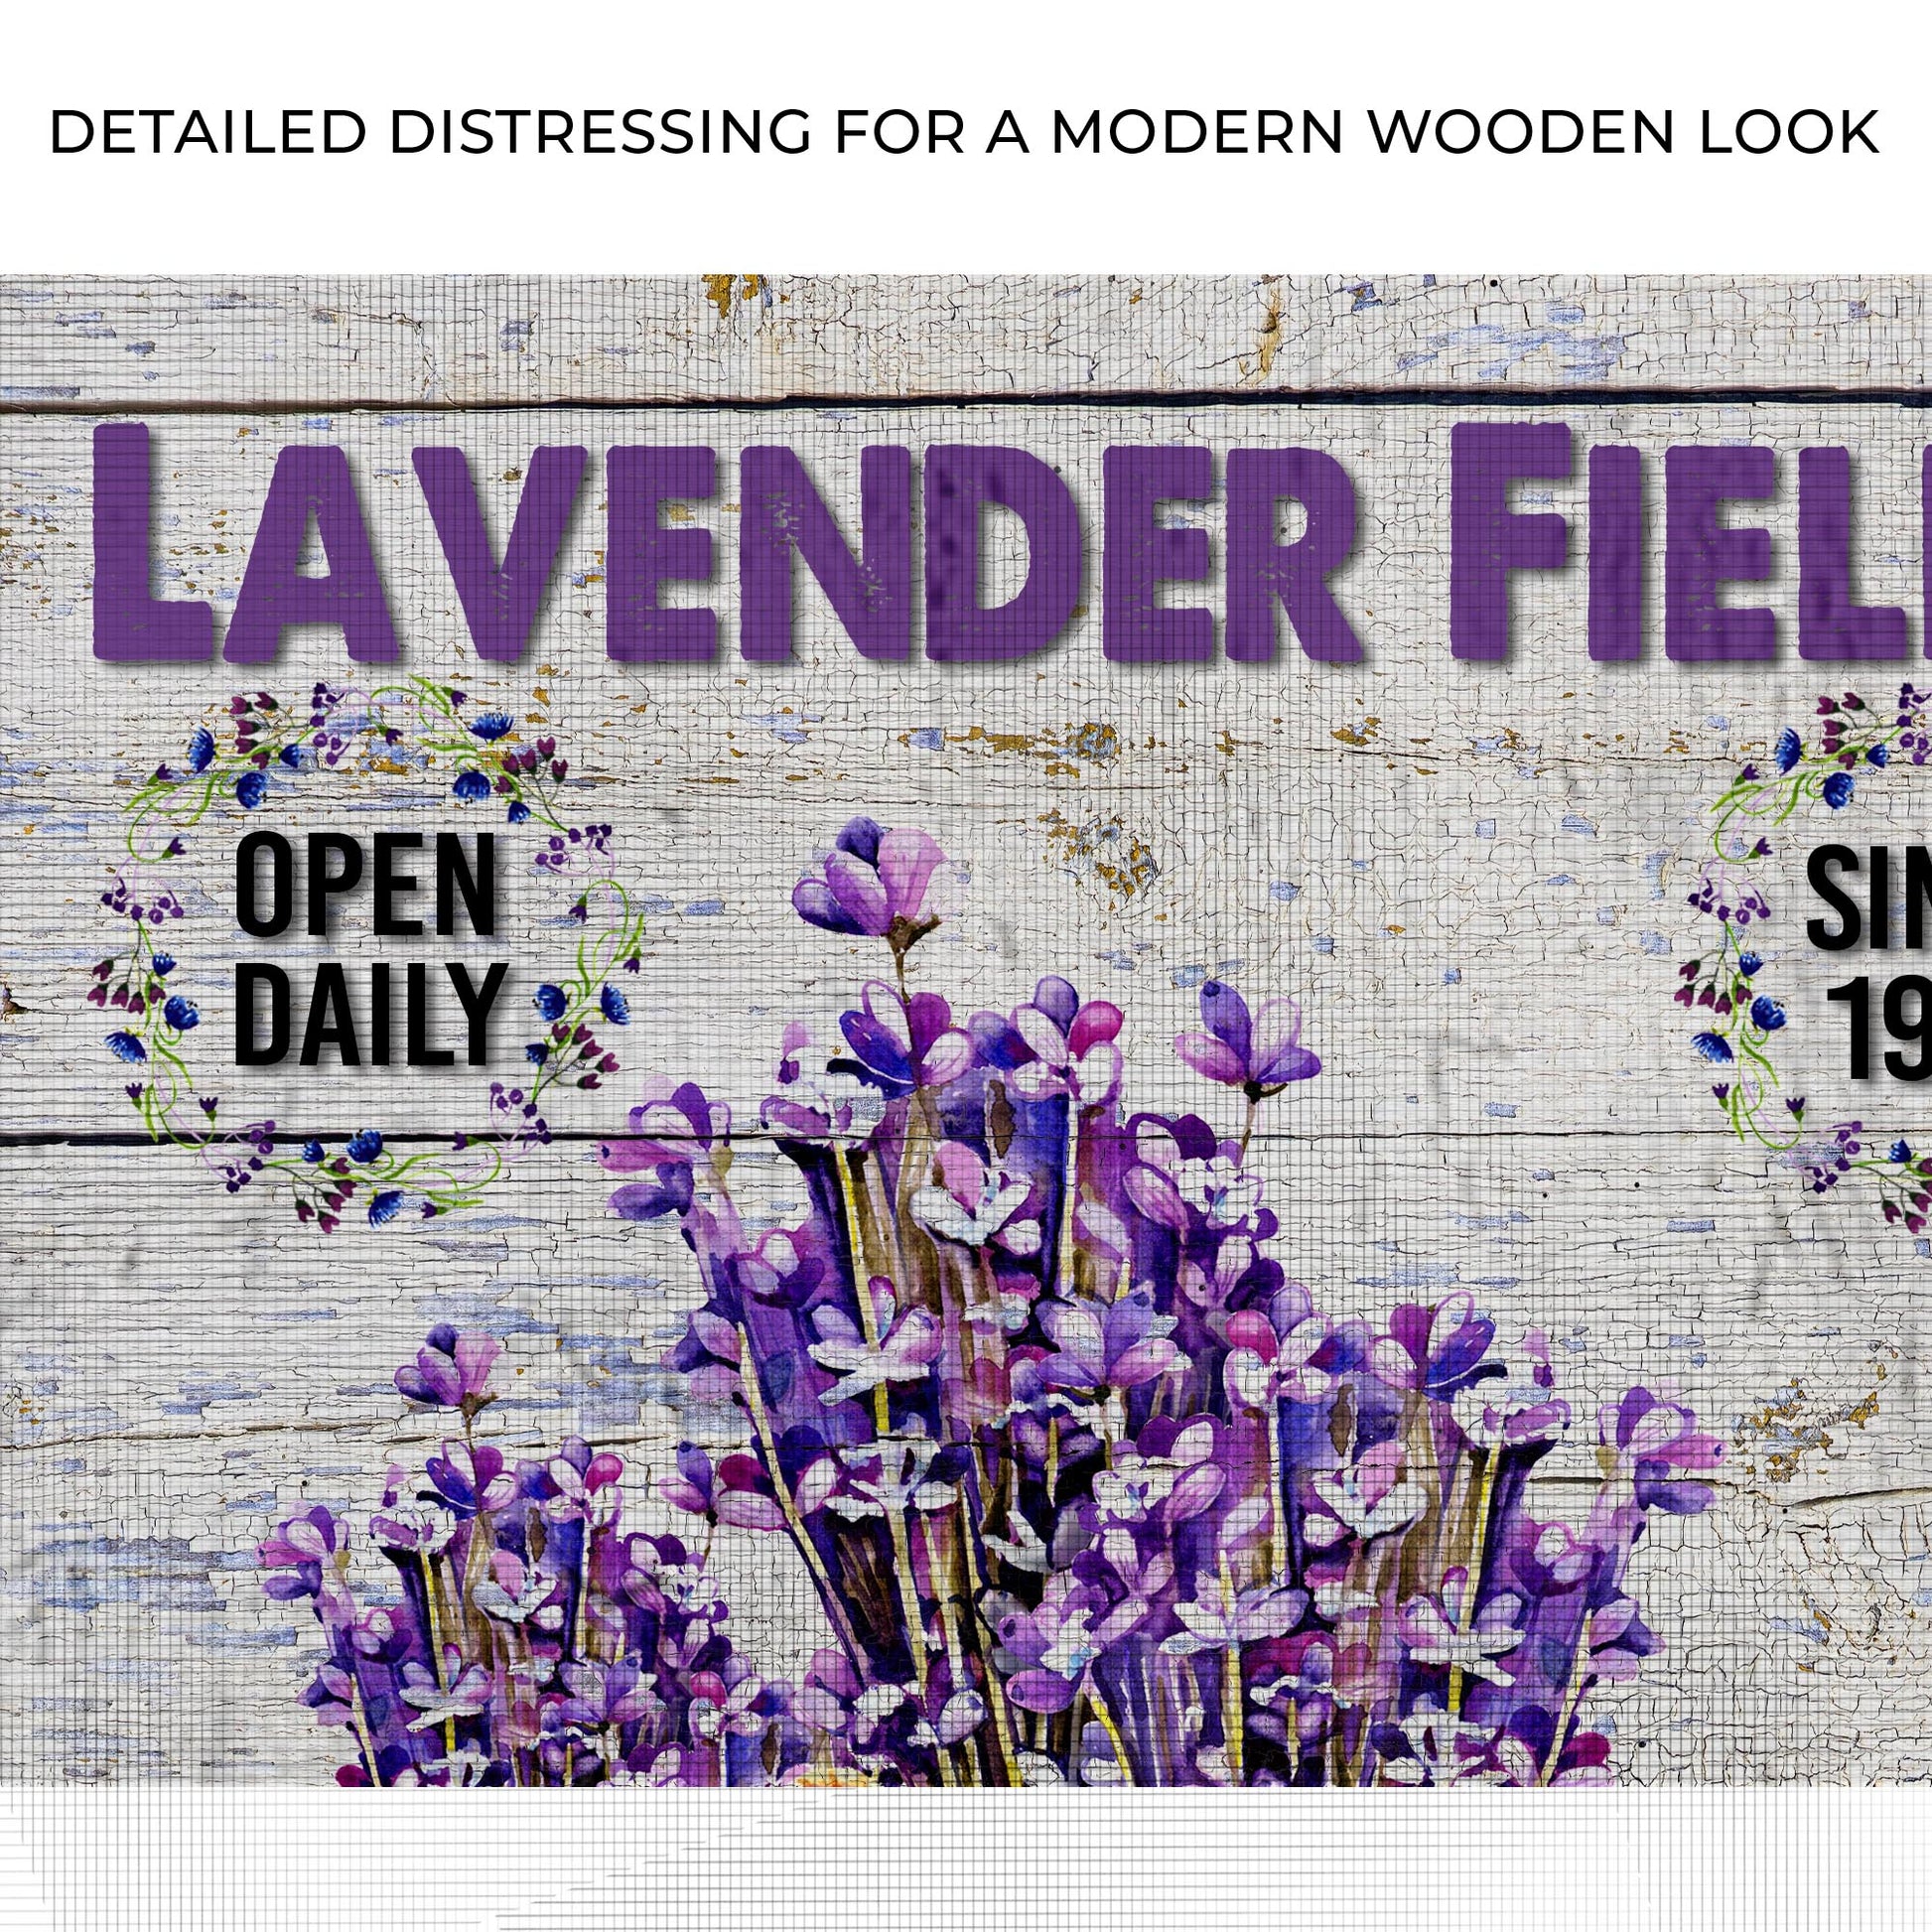 Lavender Fields Farm & Market Sign Zoom - Image by Tailored Canvases